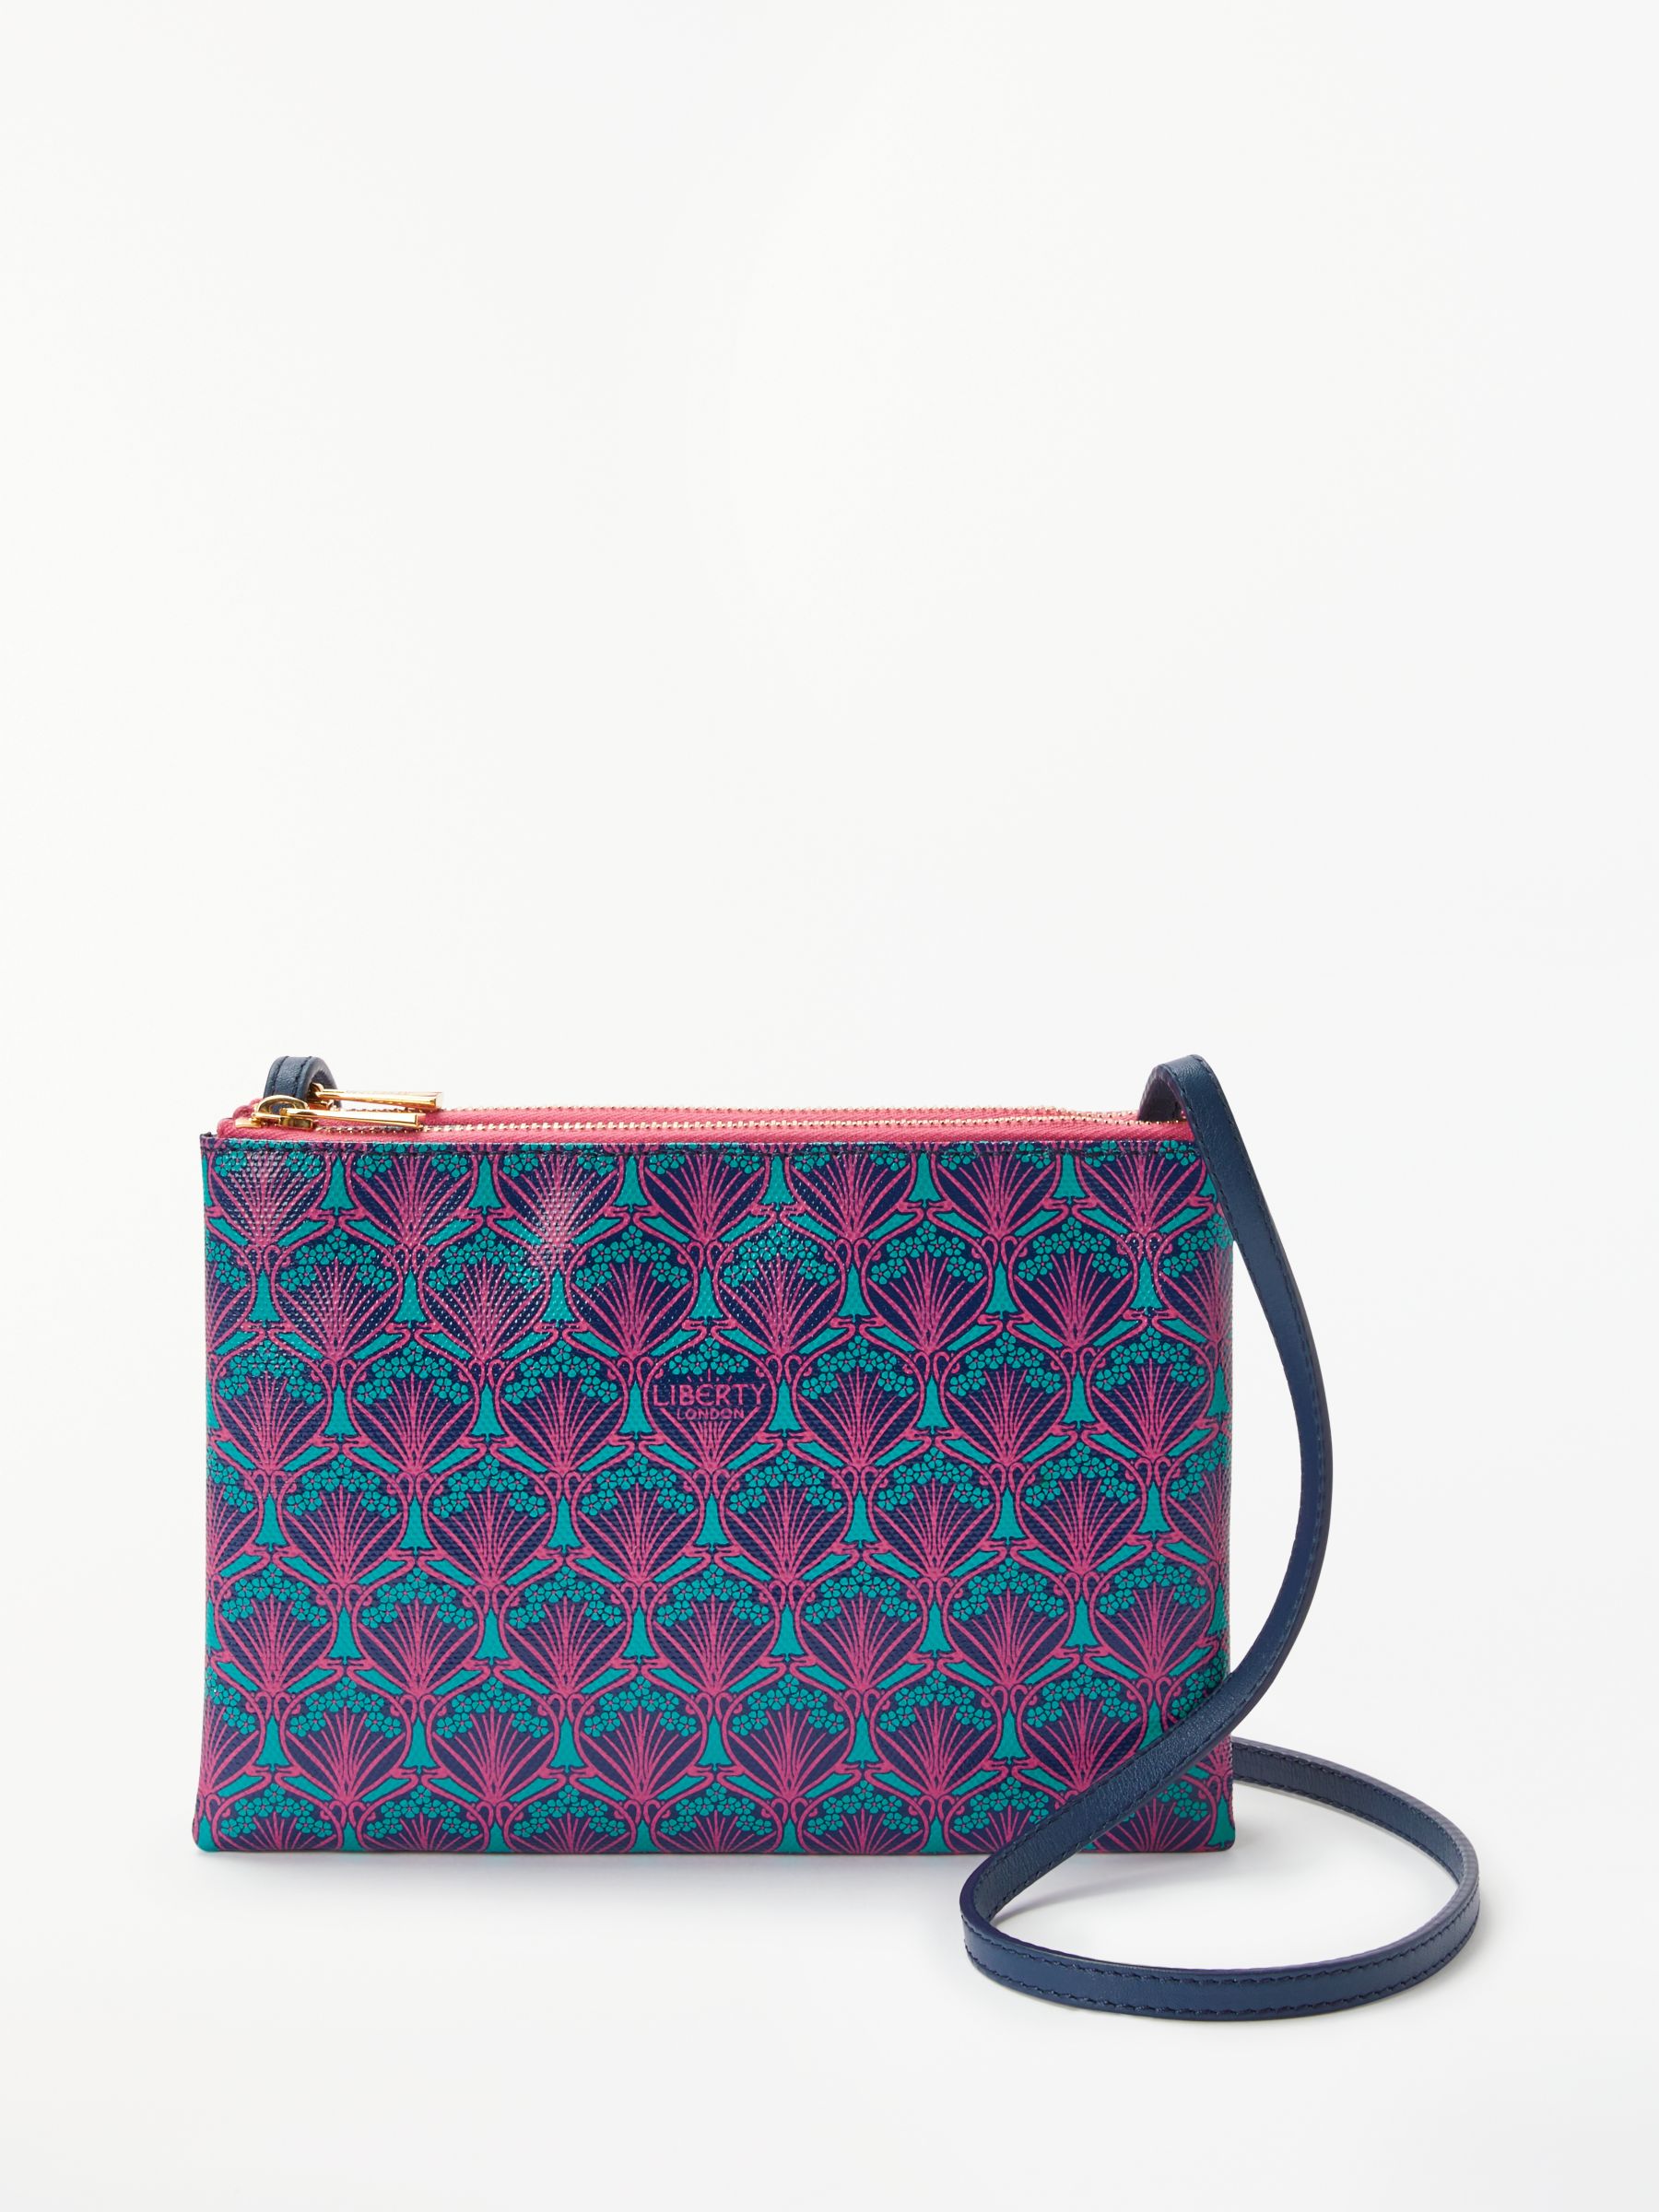 Liberty London Iphis Bayley Duo Pouch Cross Body Bag